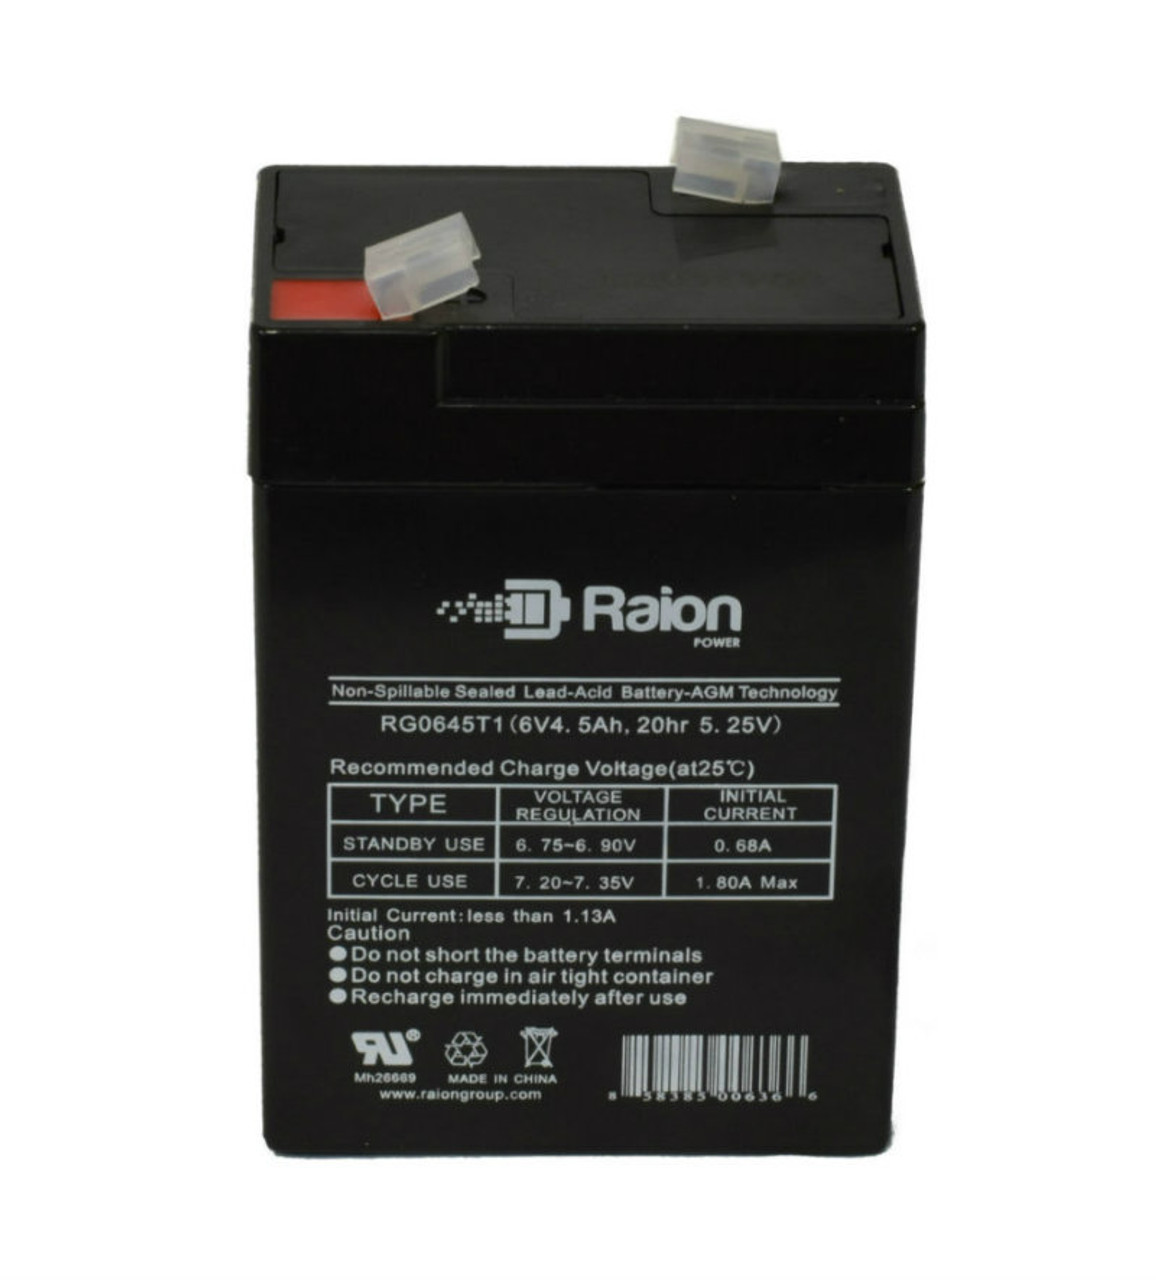 Raion Power RG0645T1 Replacement Battery Cartridge for Alaris Medical 821 Intell Pump